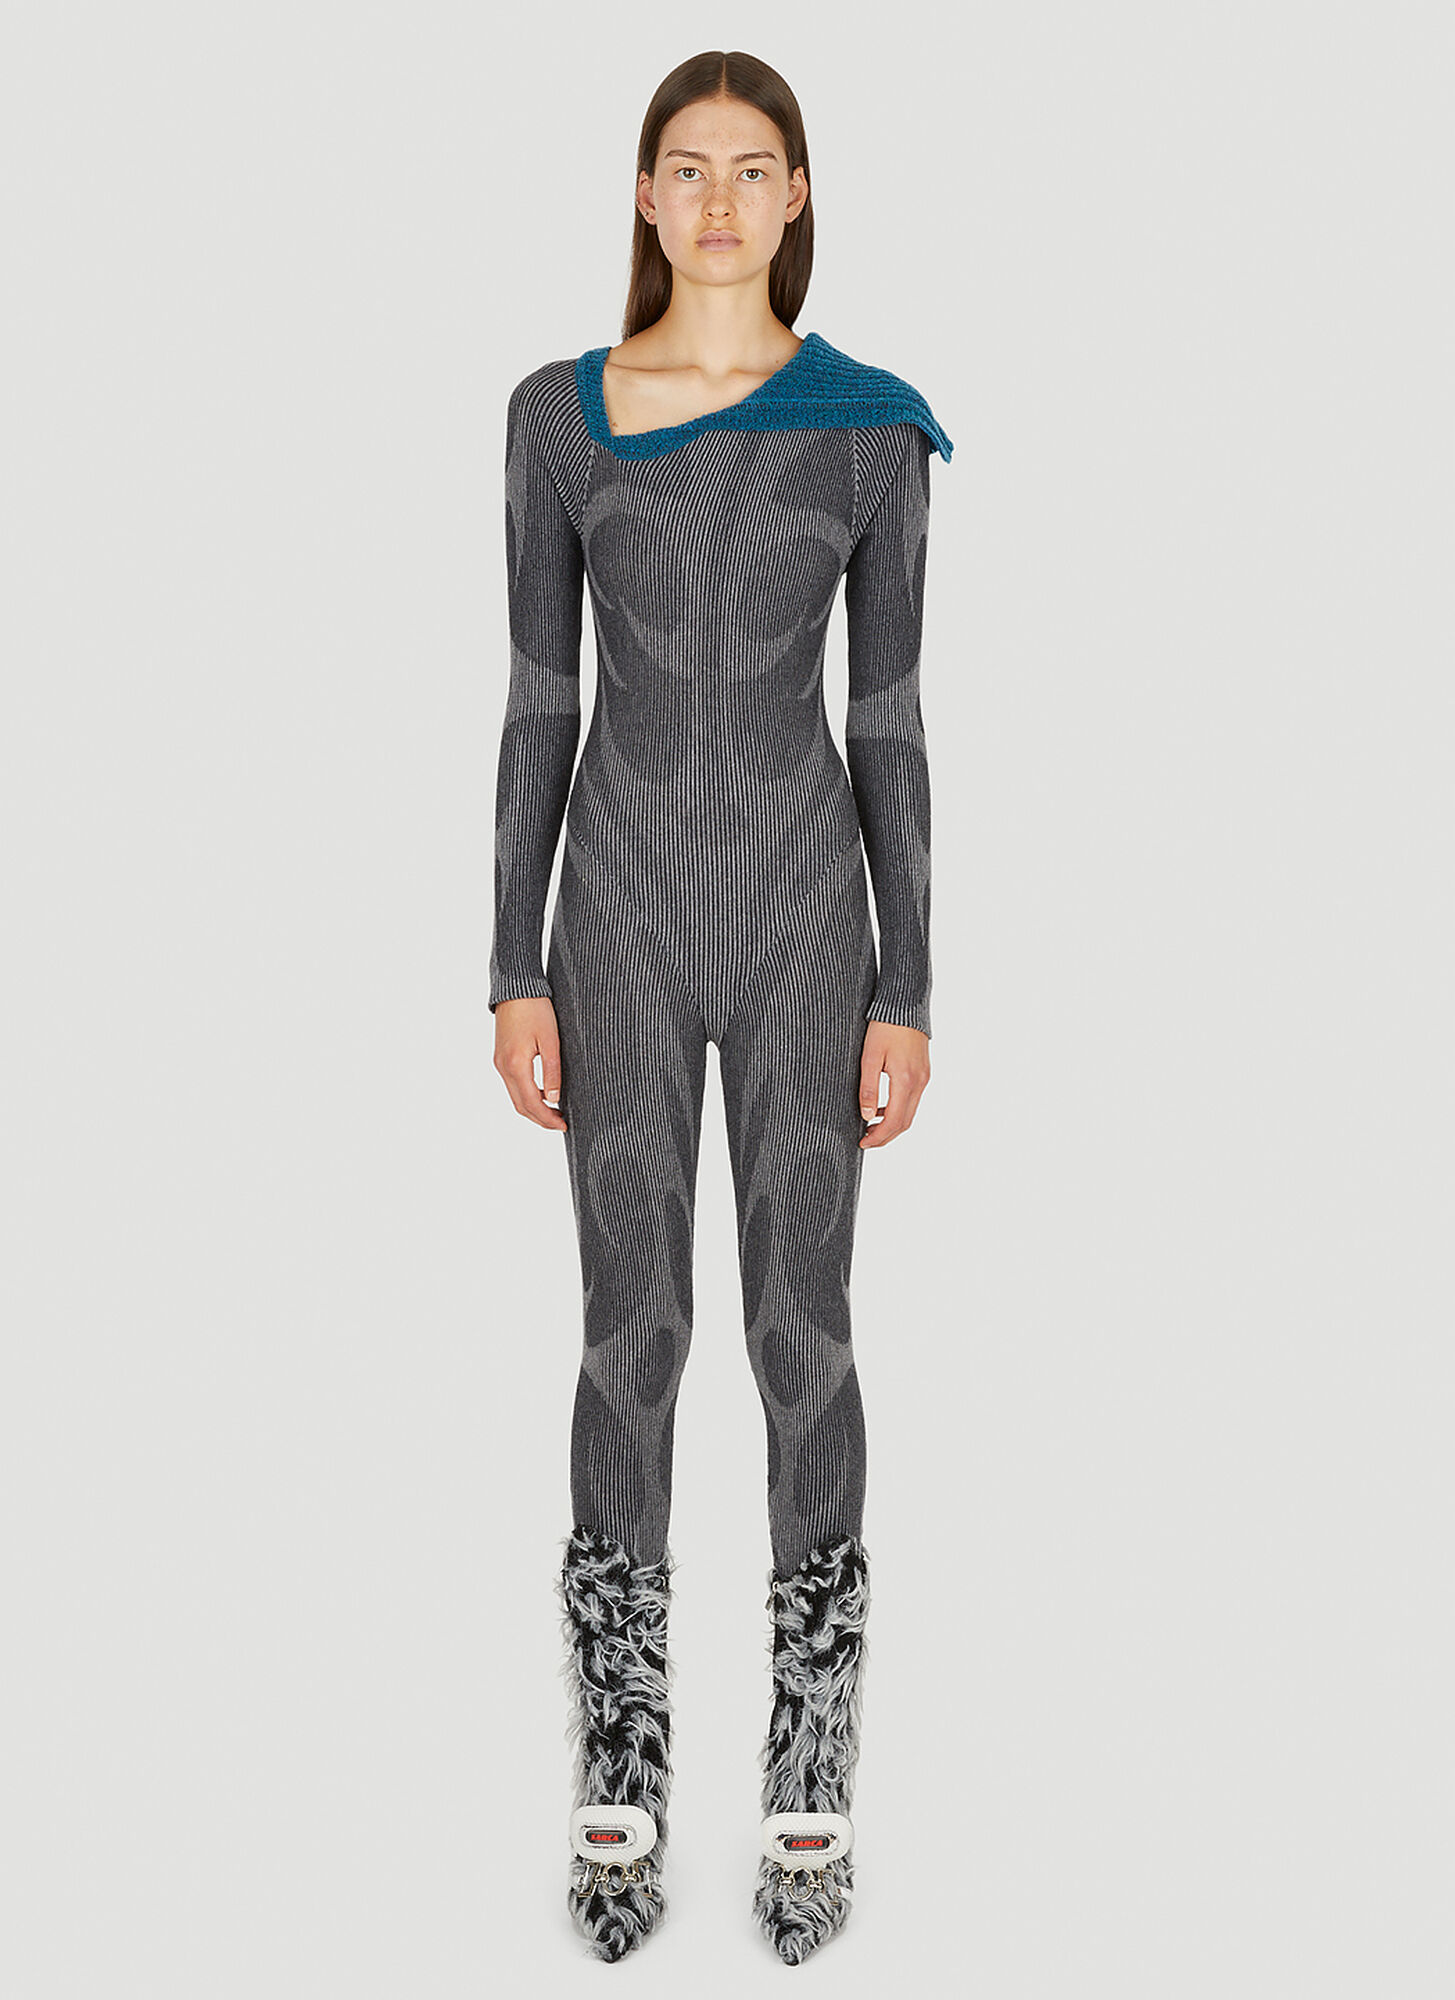 Paolina Russo Illusion Knit Catsuit Female Grey